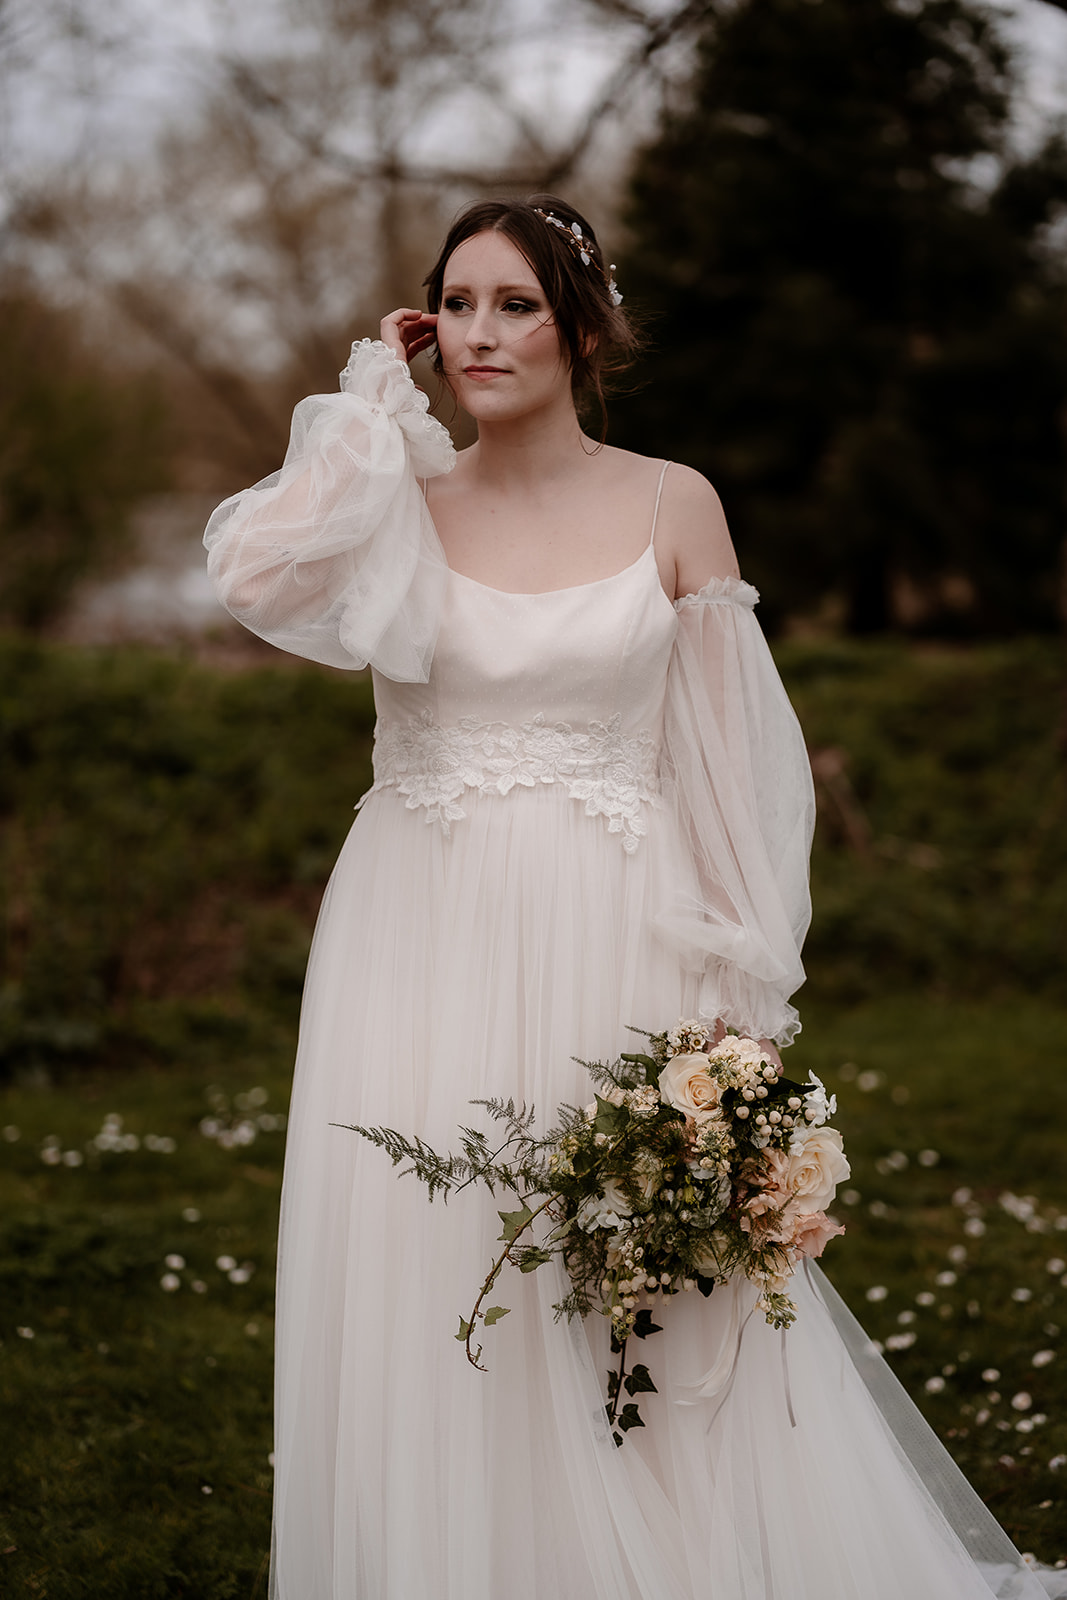 Bride in a tulle wedding dress with sheer sleeves stands holding her bouquet at Mapledurham House wedding venue